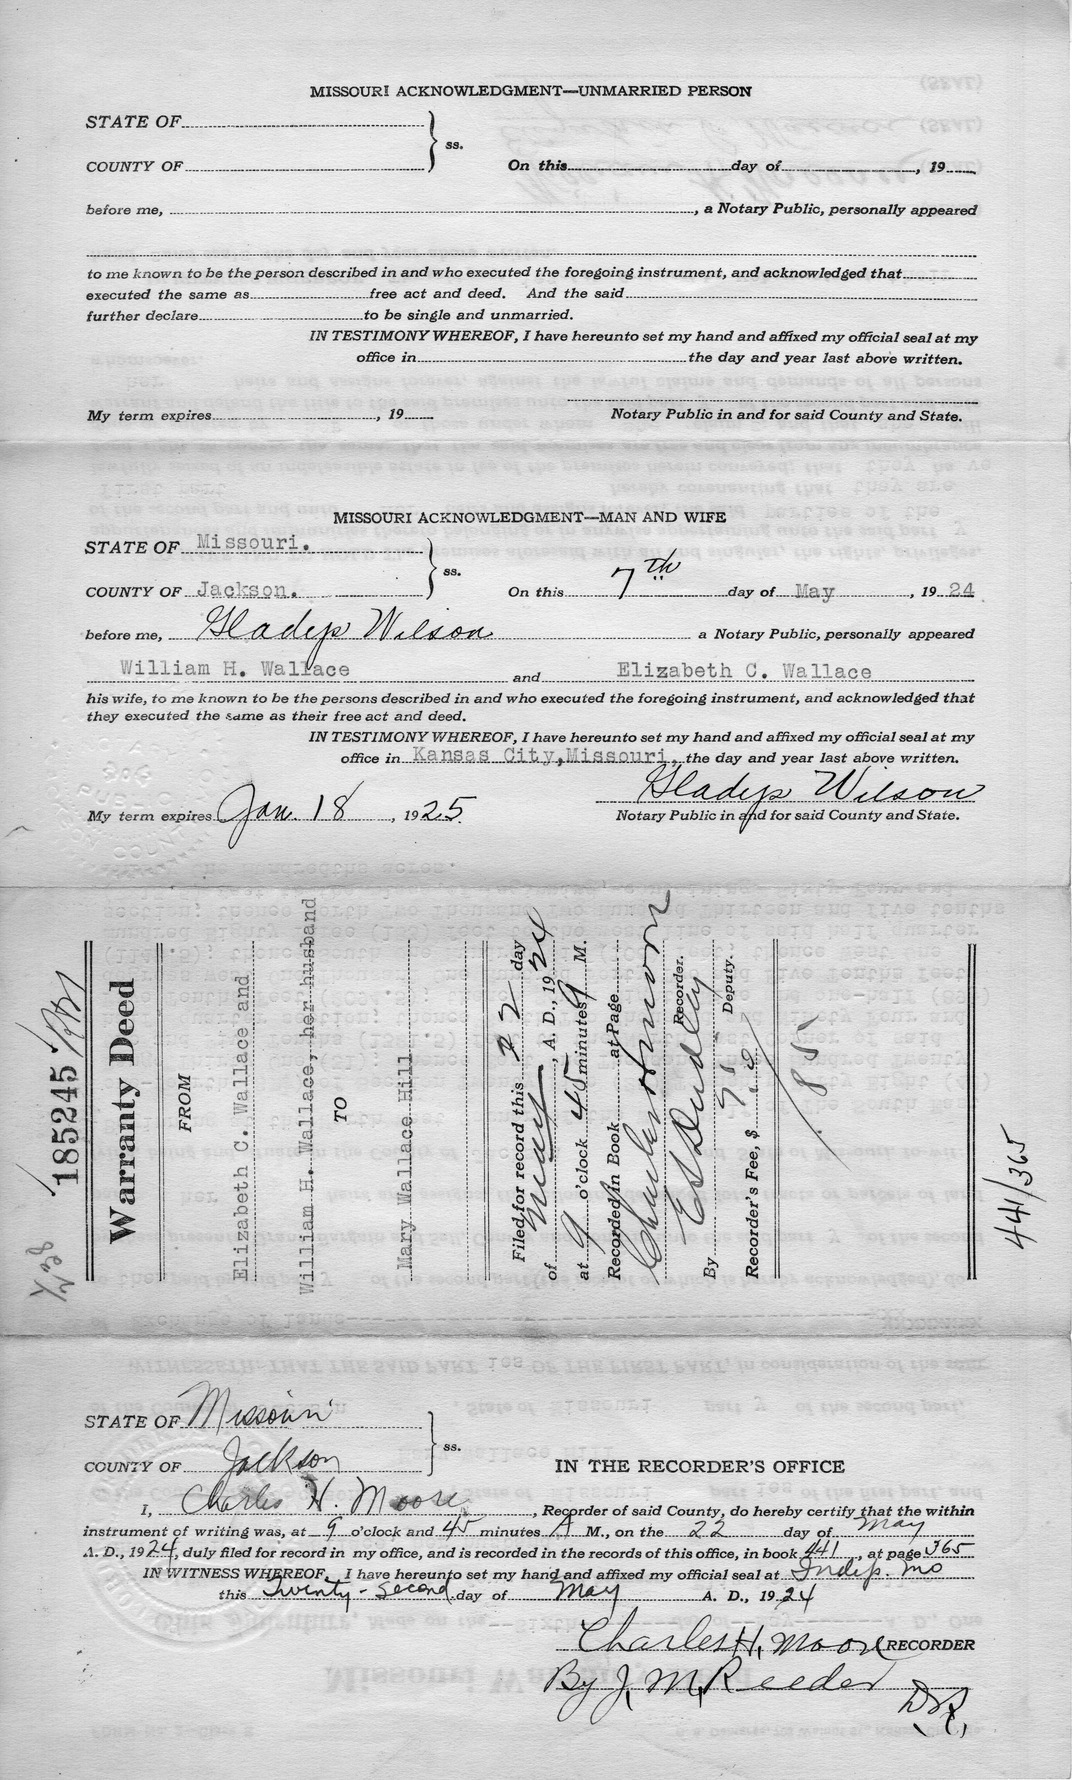 Warranty Deed from Elizabeth C. Wallace and William H. Wallace to Mary Wallace Hill